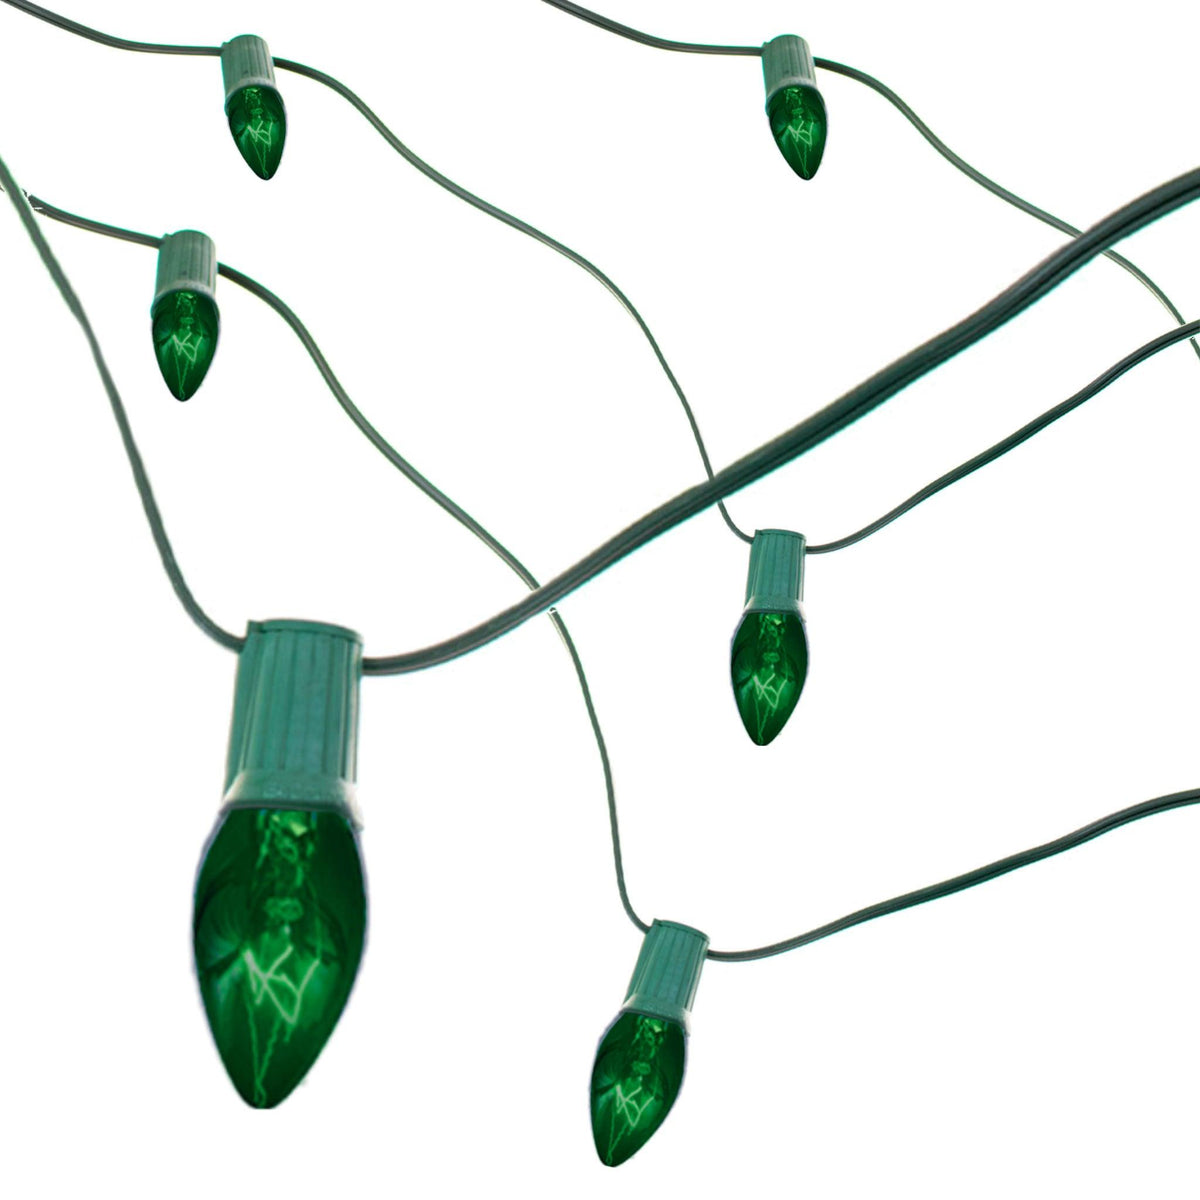 C-7 & C-9 Green Christmas Light Bulbs.  Replace your old bulbs with a set of brand new Candelabra Green Lights on sale at leedisplay.com